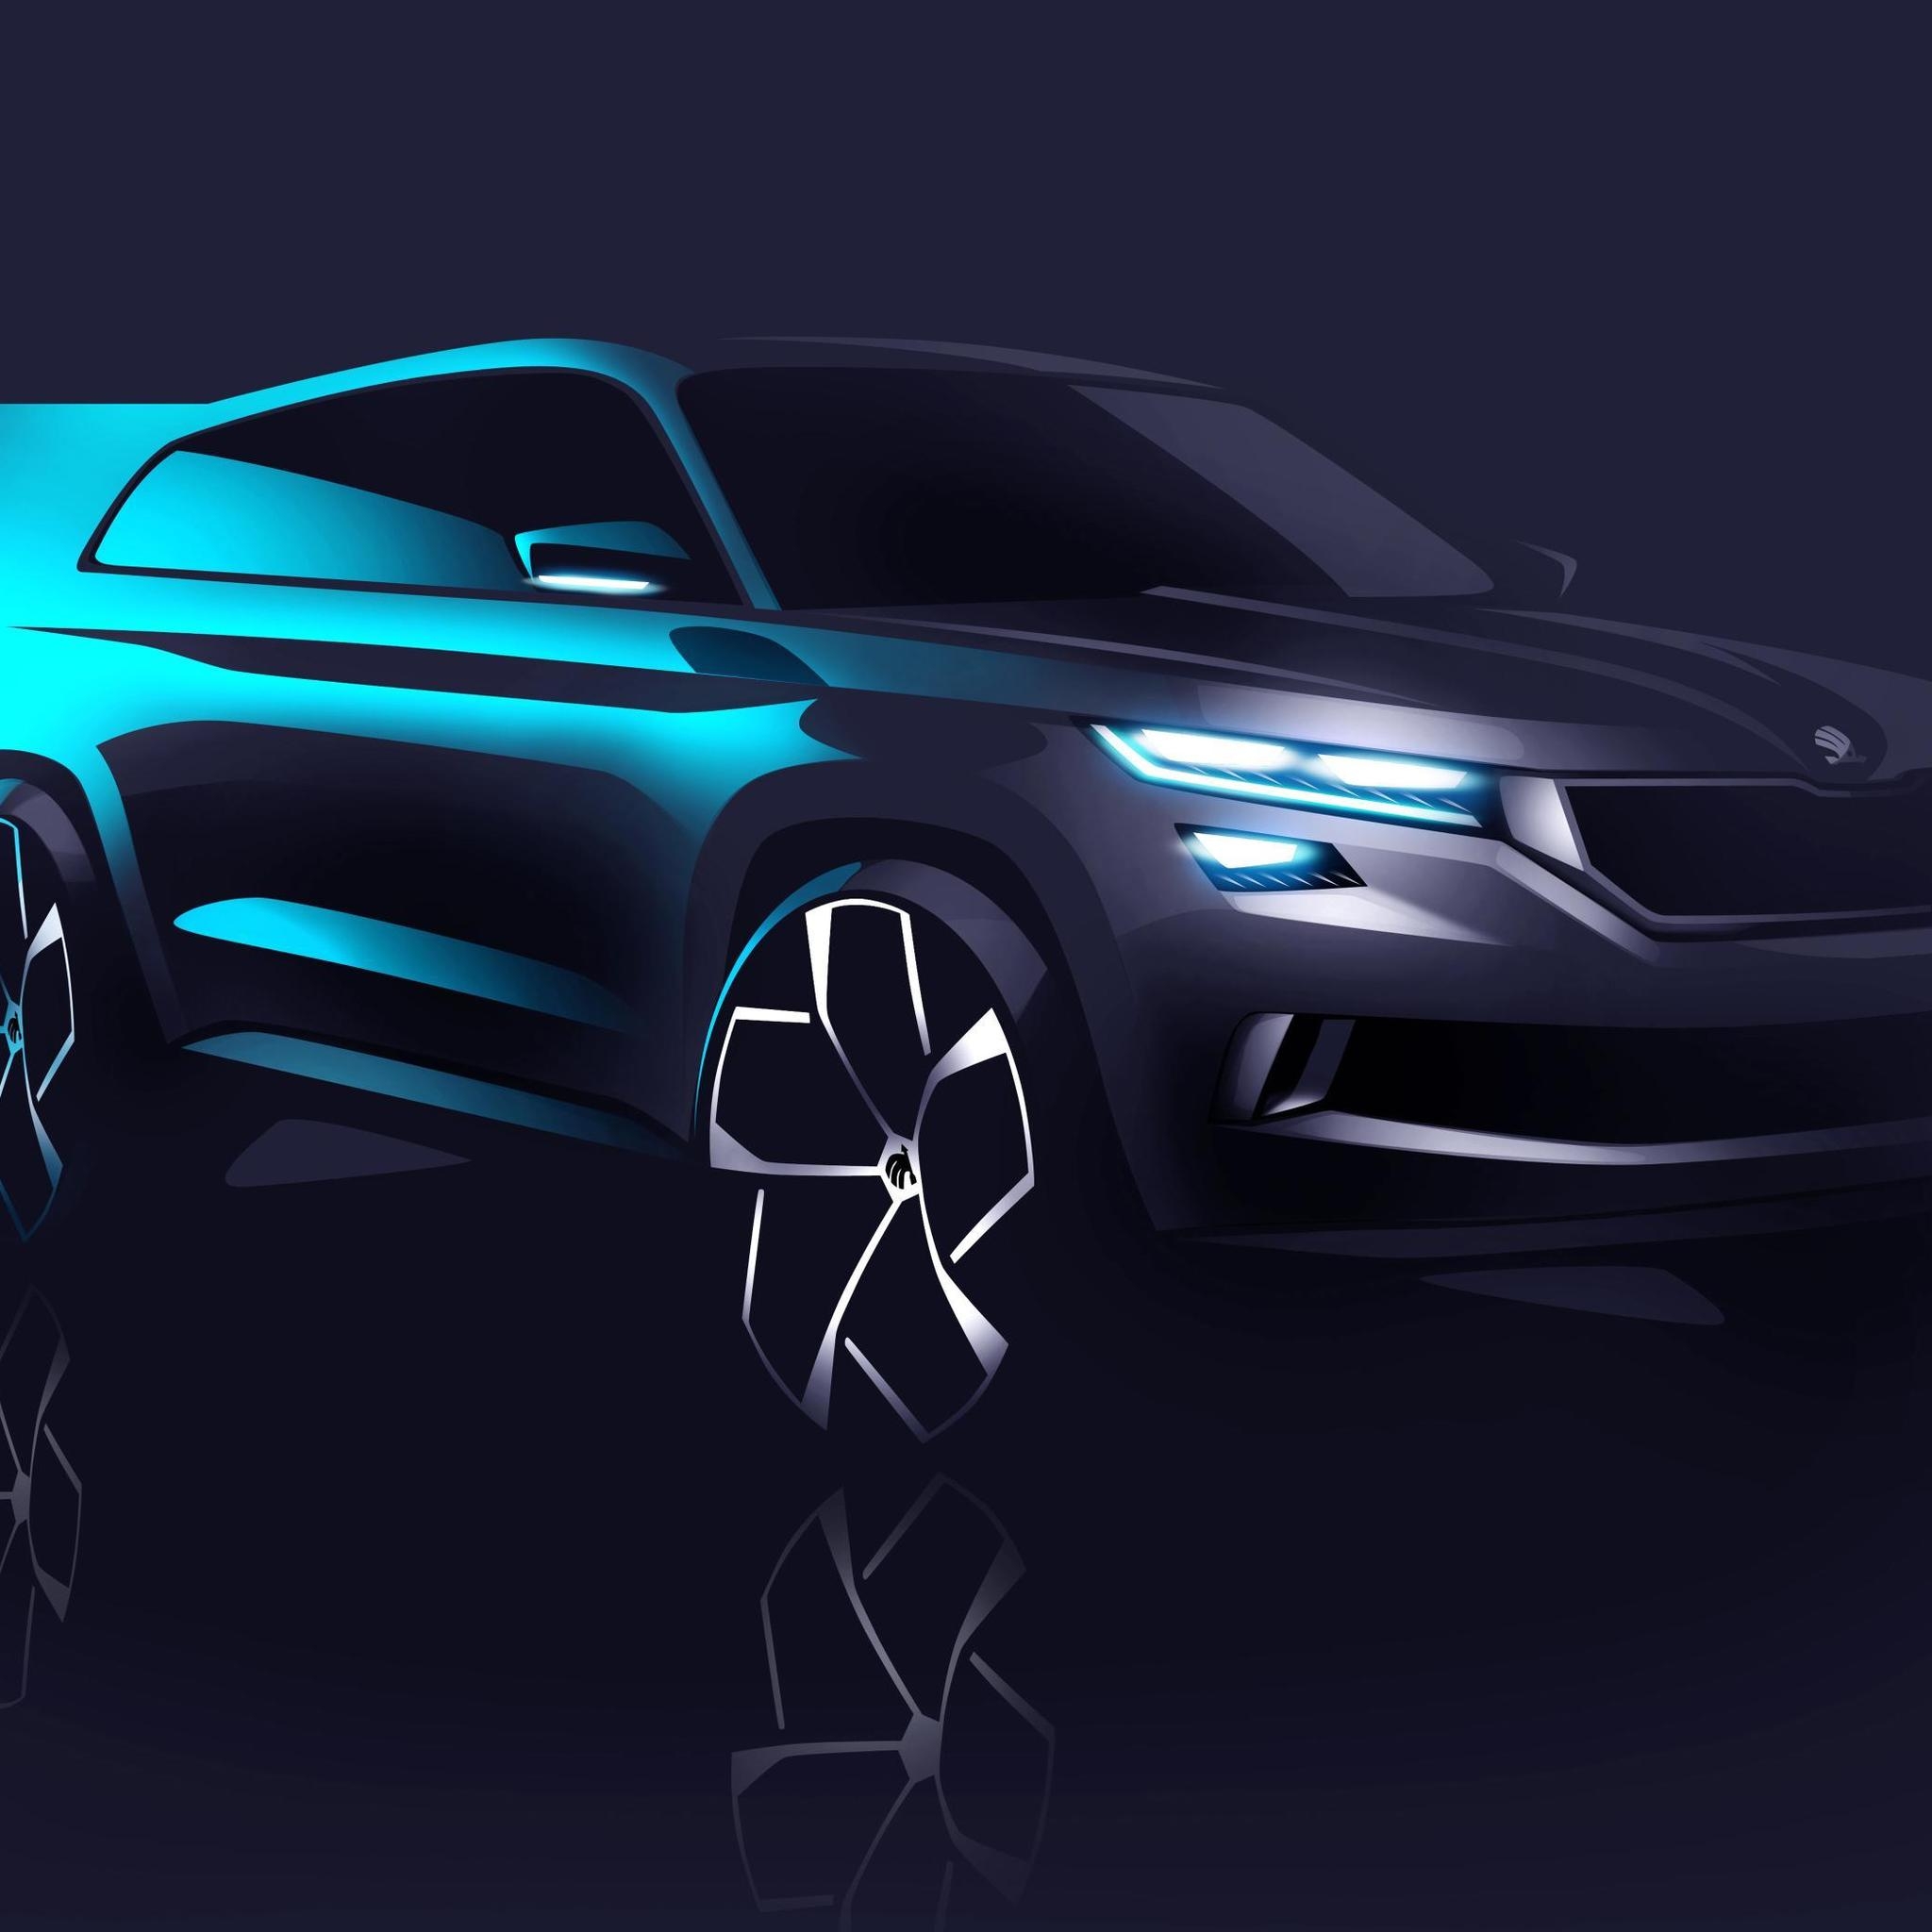 2016 Skoda Visions Concept for 2048 x 2048 New iPad resolution